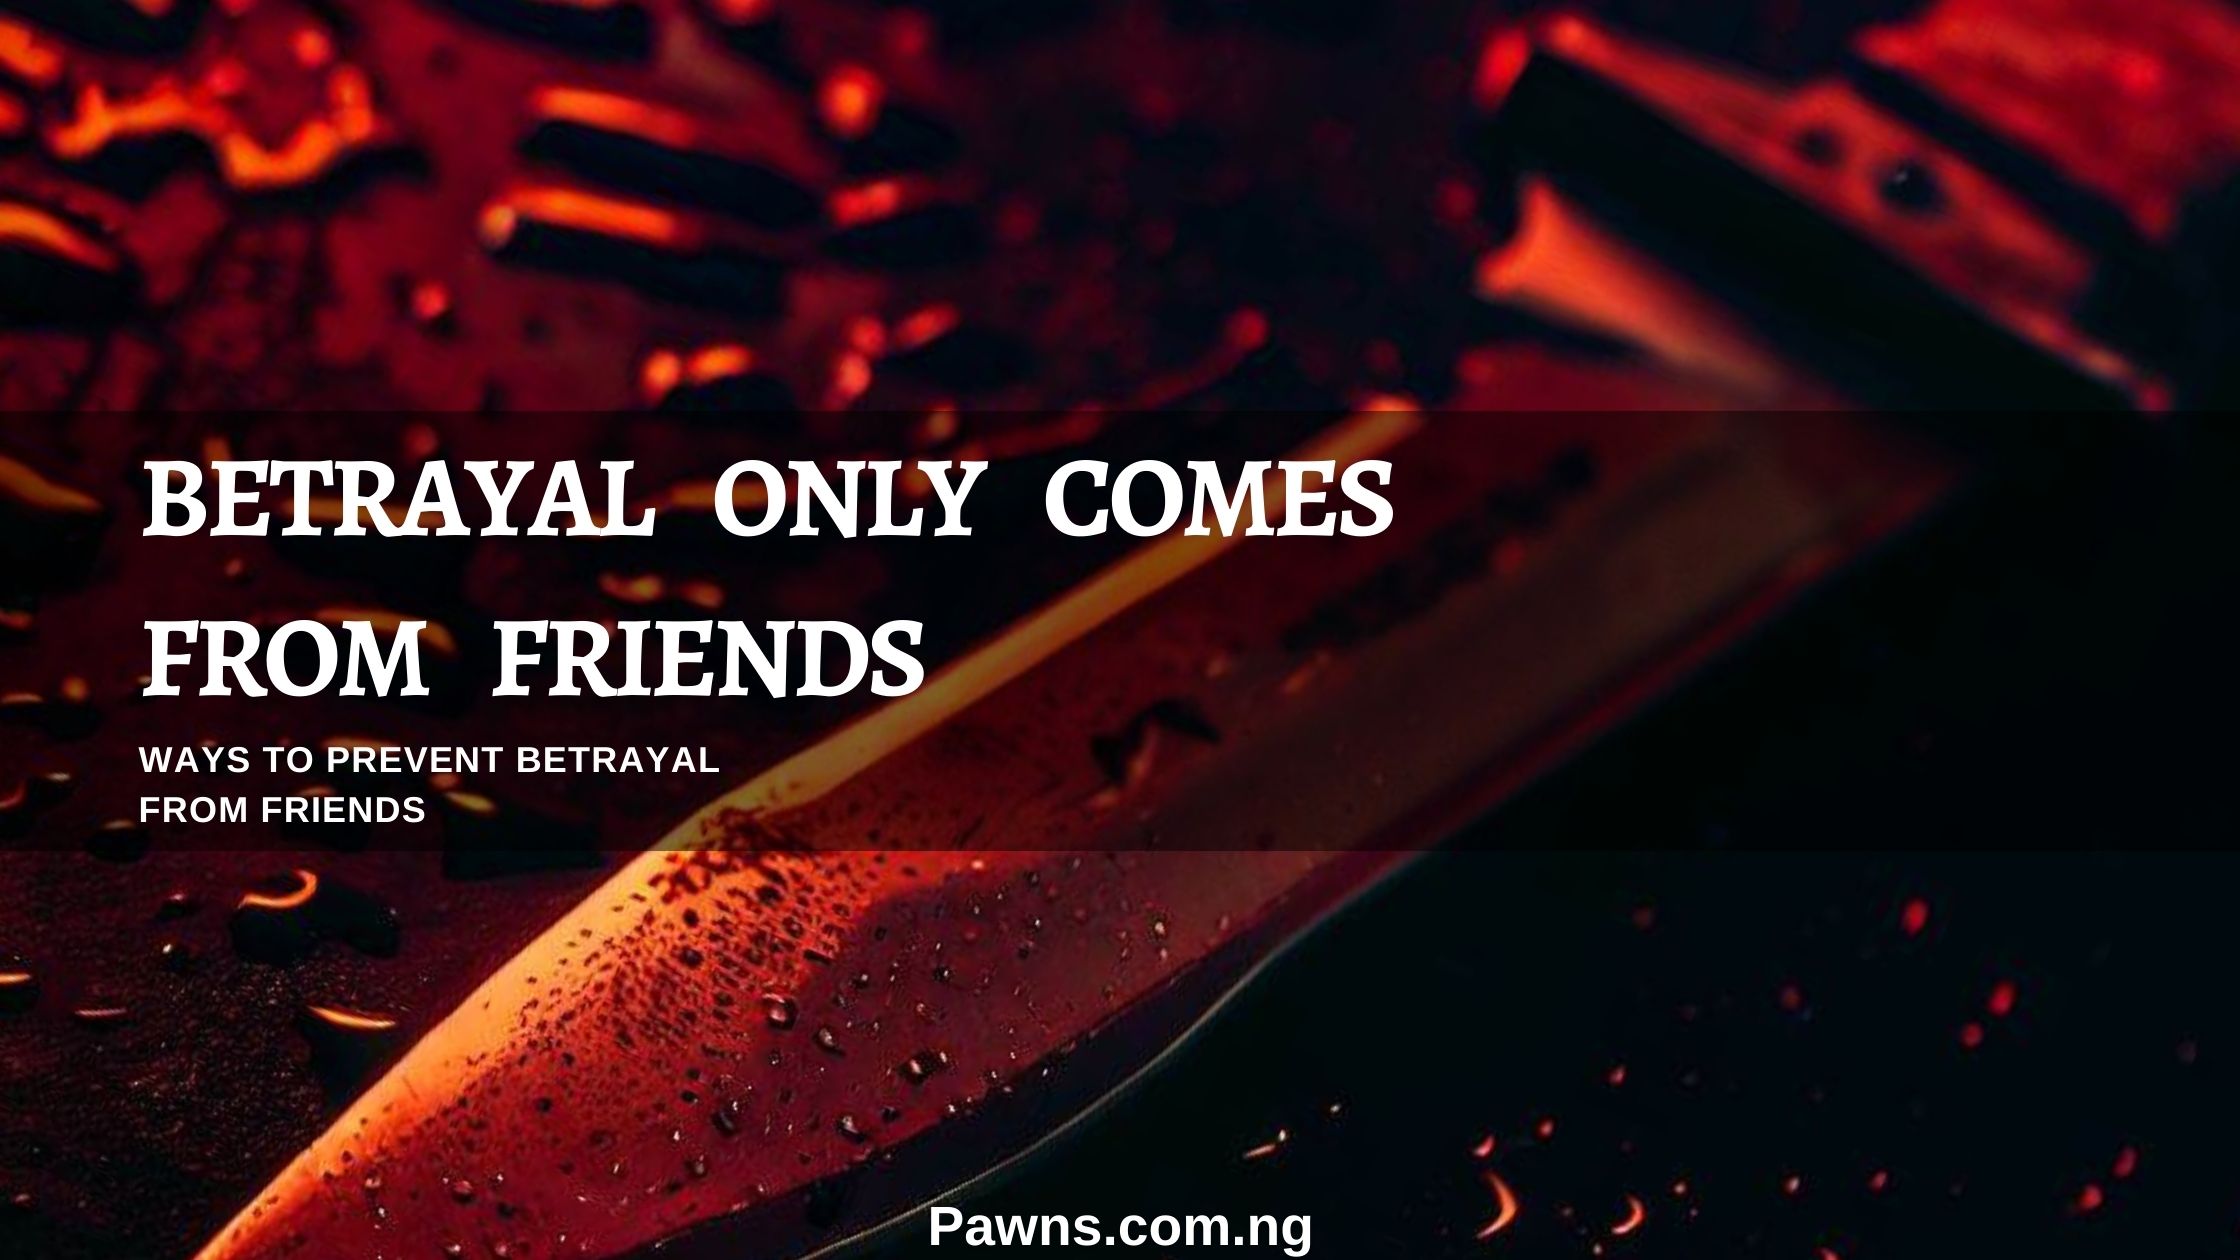 Betrayal only comes from friends ways to prevent betrayal from friends